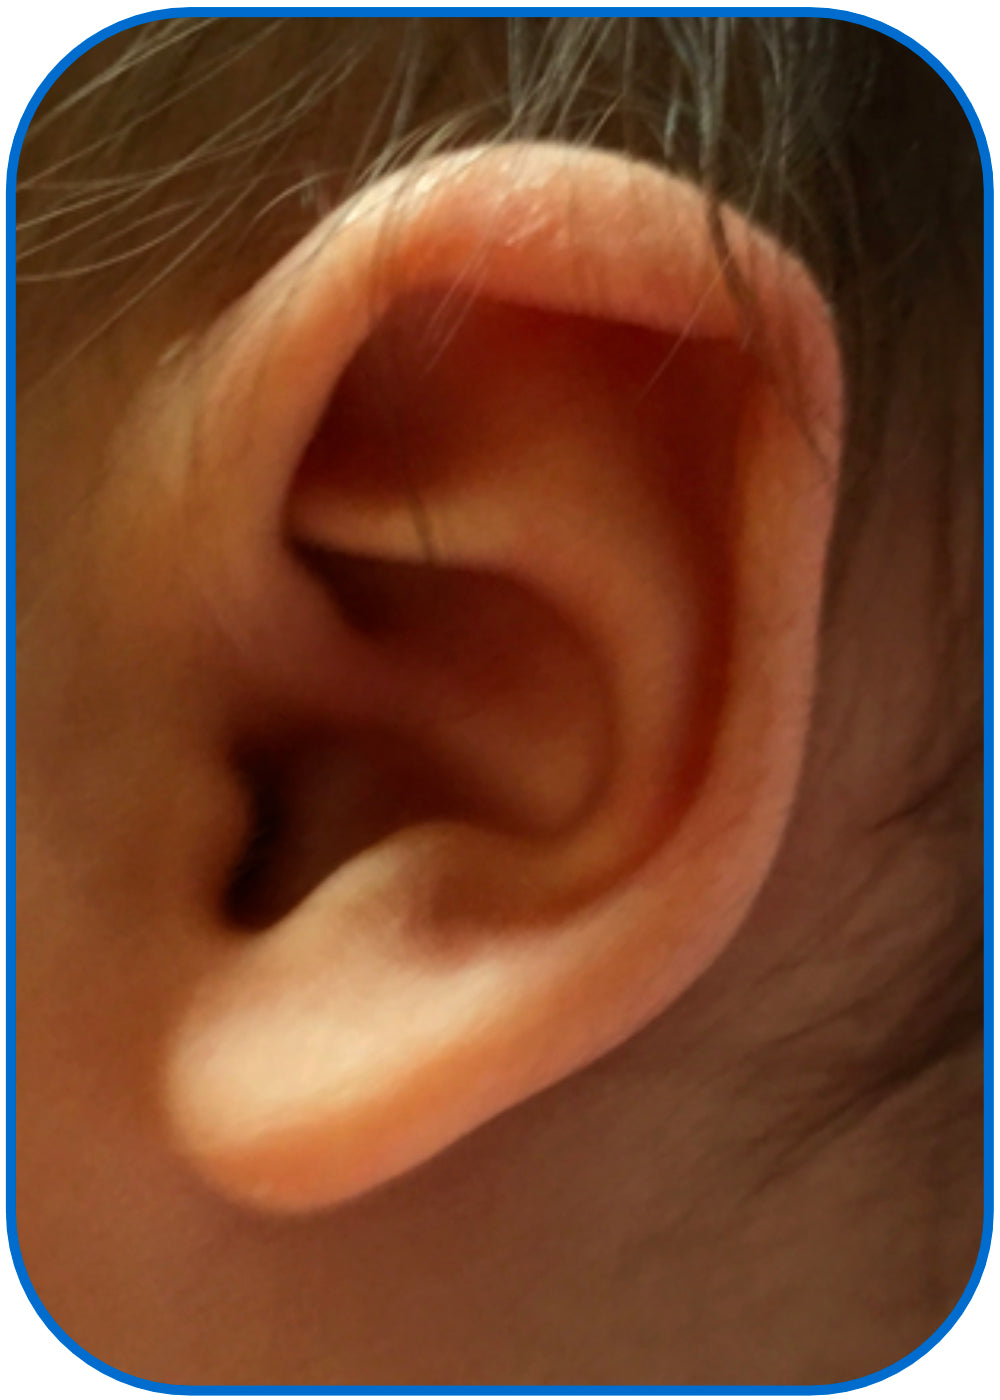 corrected baby ear usa parent story